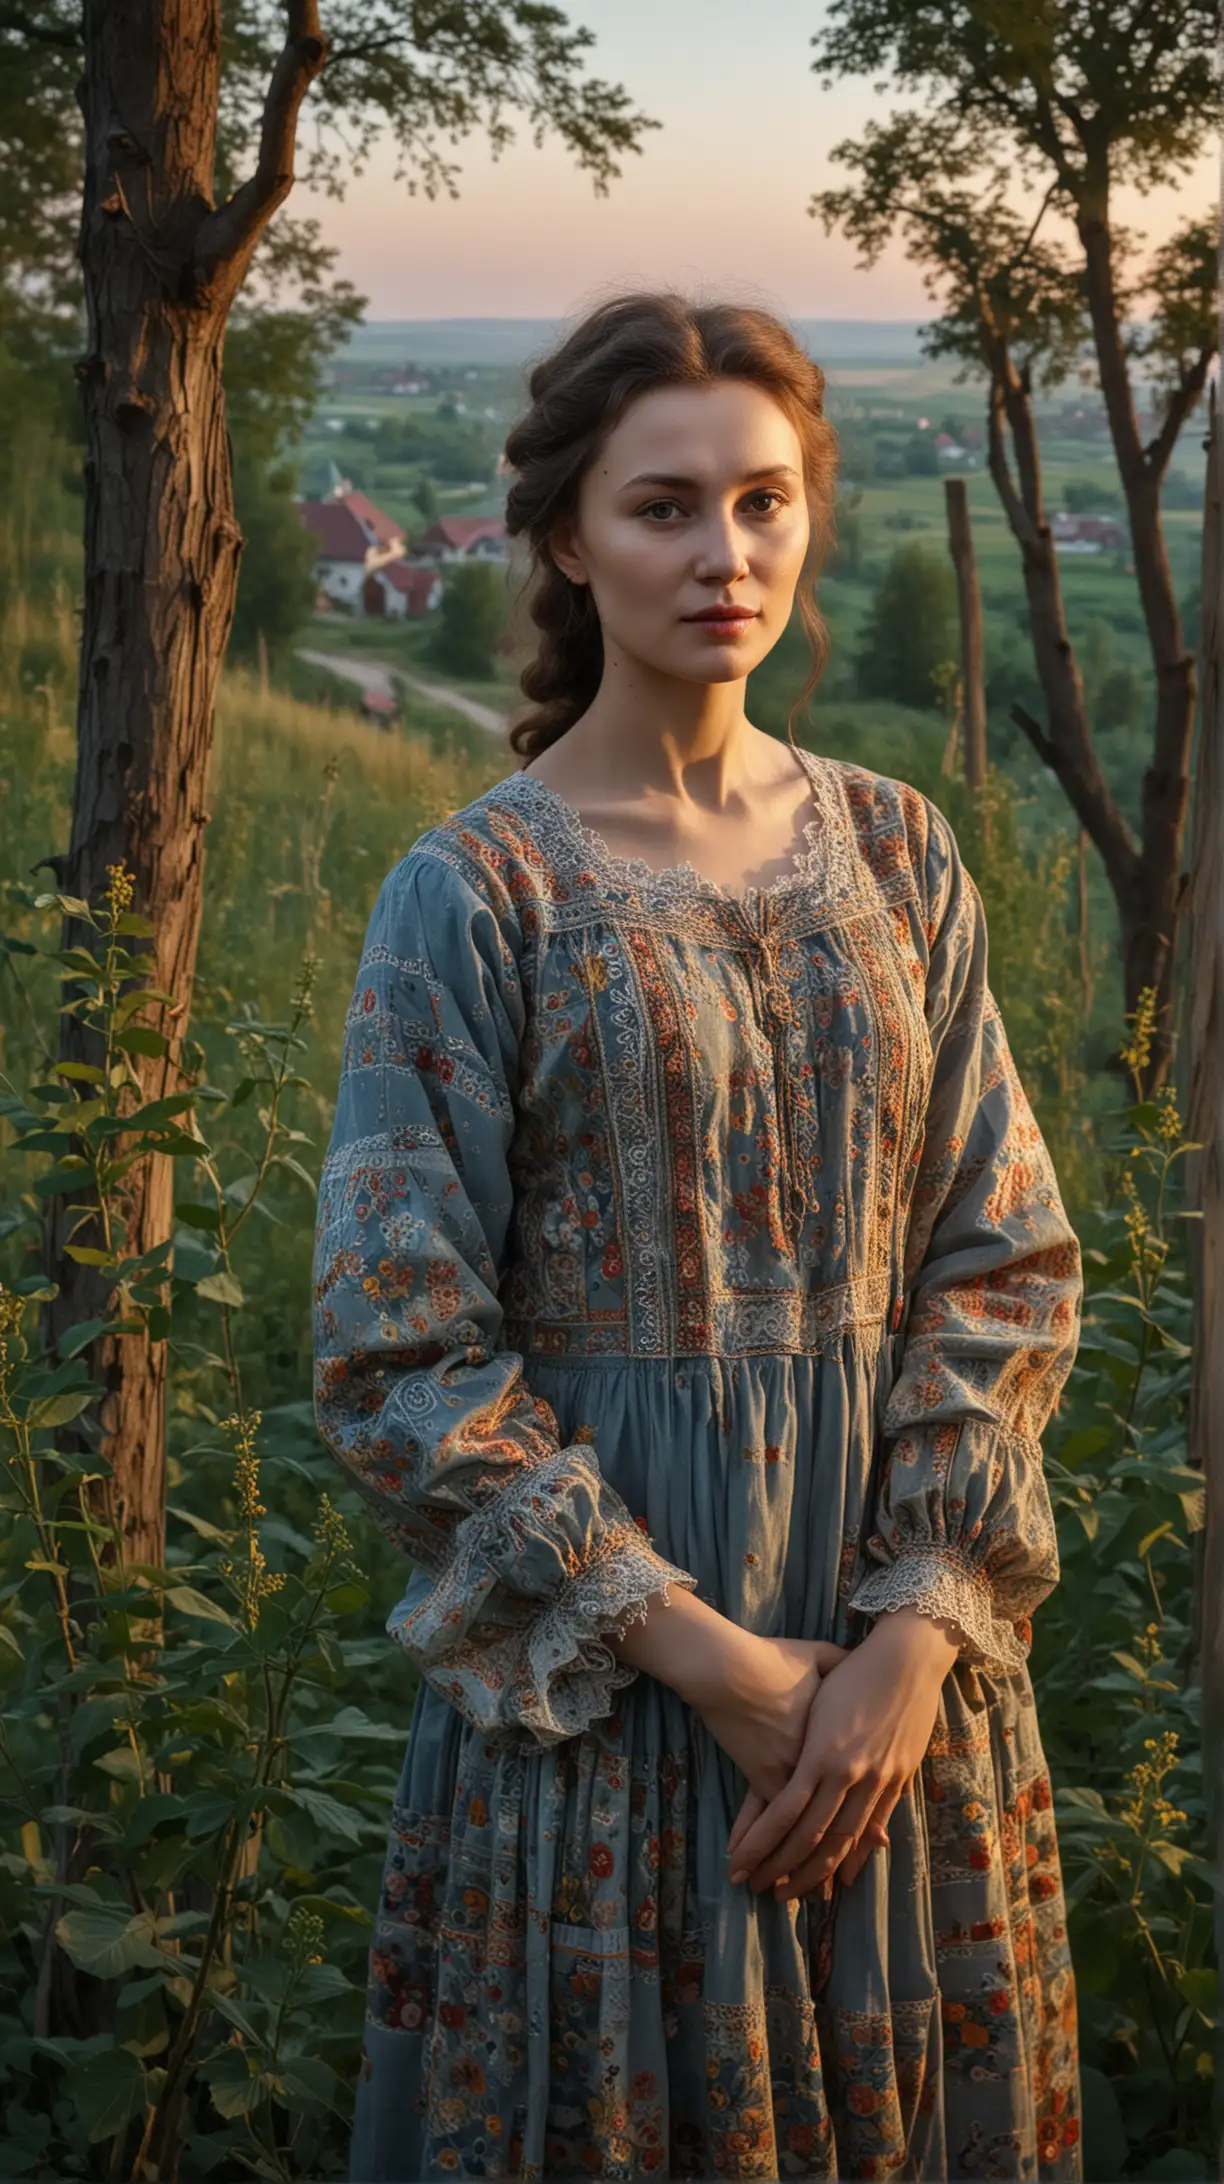 Start with a picturesque image of the Ukrainian countryside at dawn or dusk, portraying the tranquil beauty of Lyudmila Pavlichenko's birthplace in the village of Belaya Tserkov.